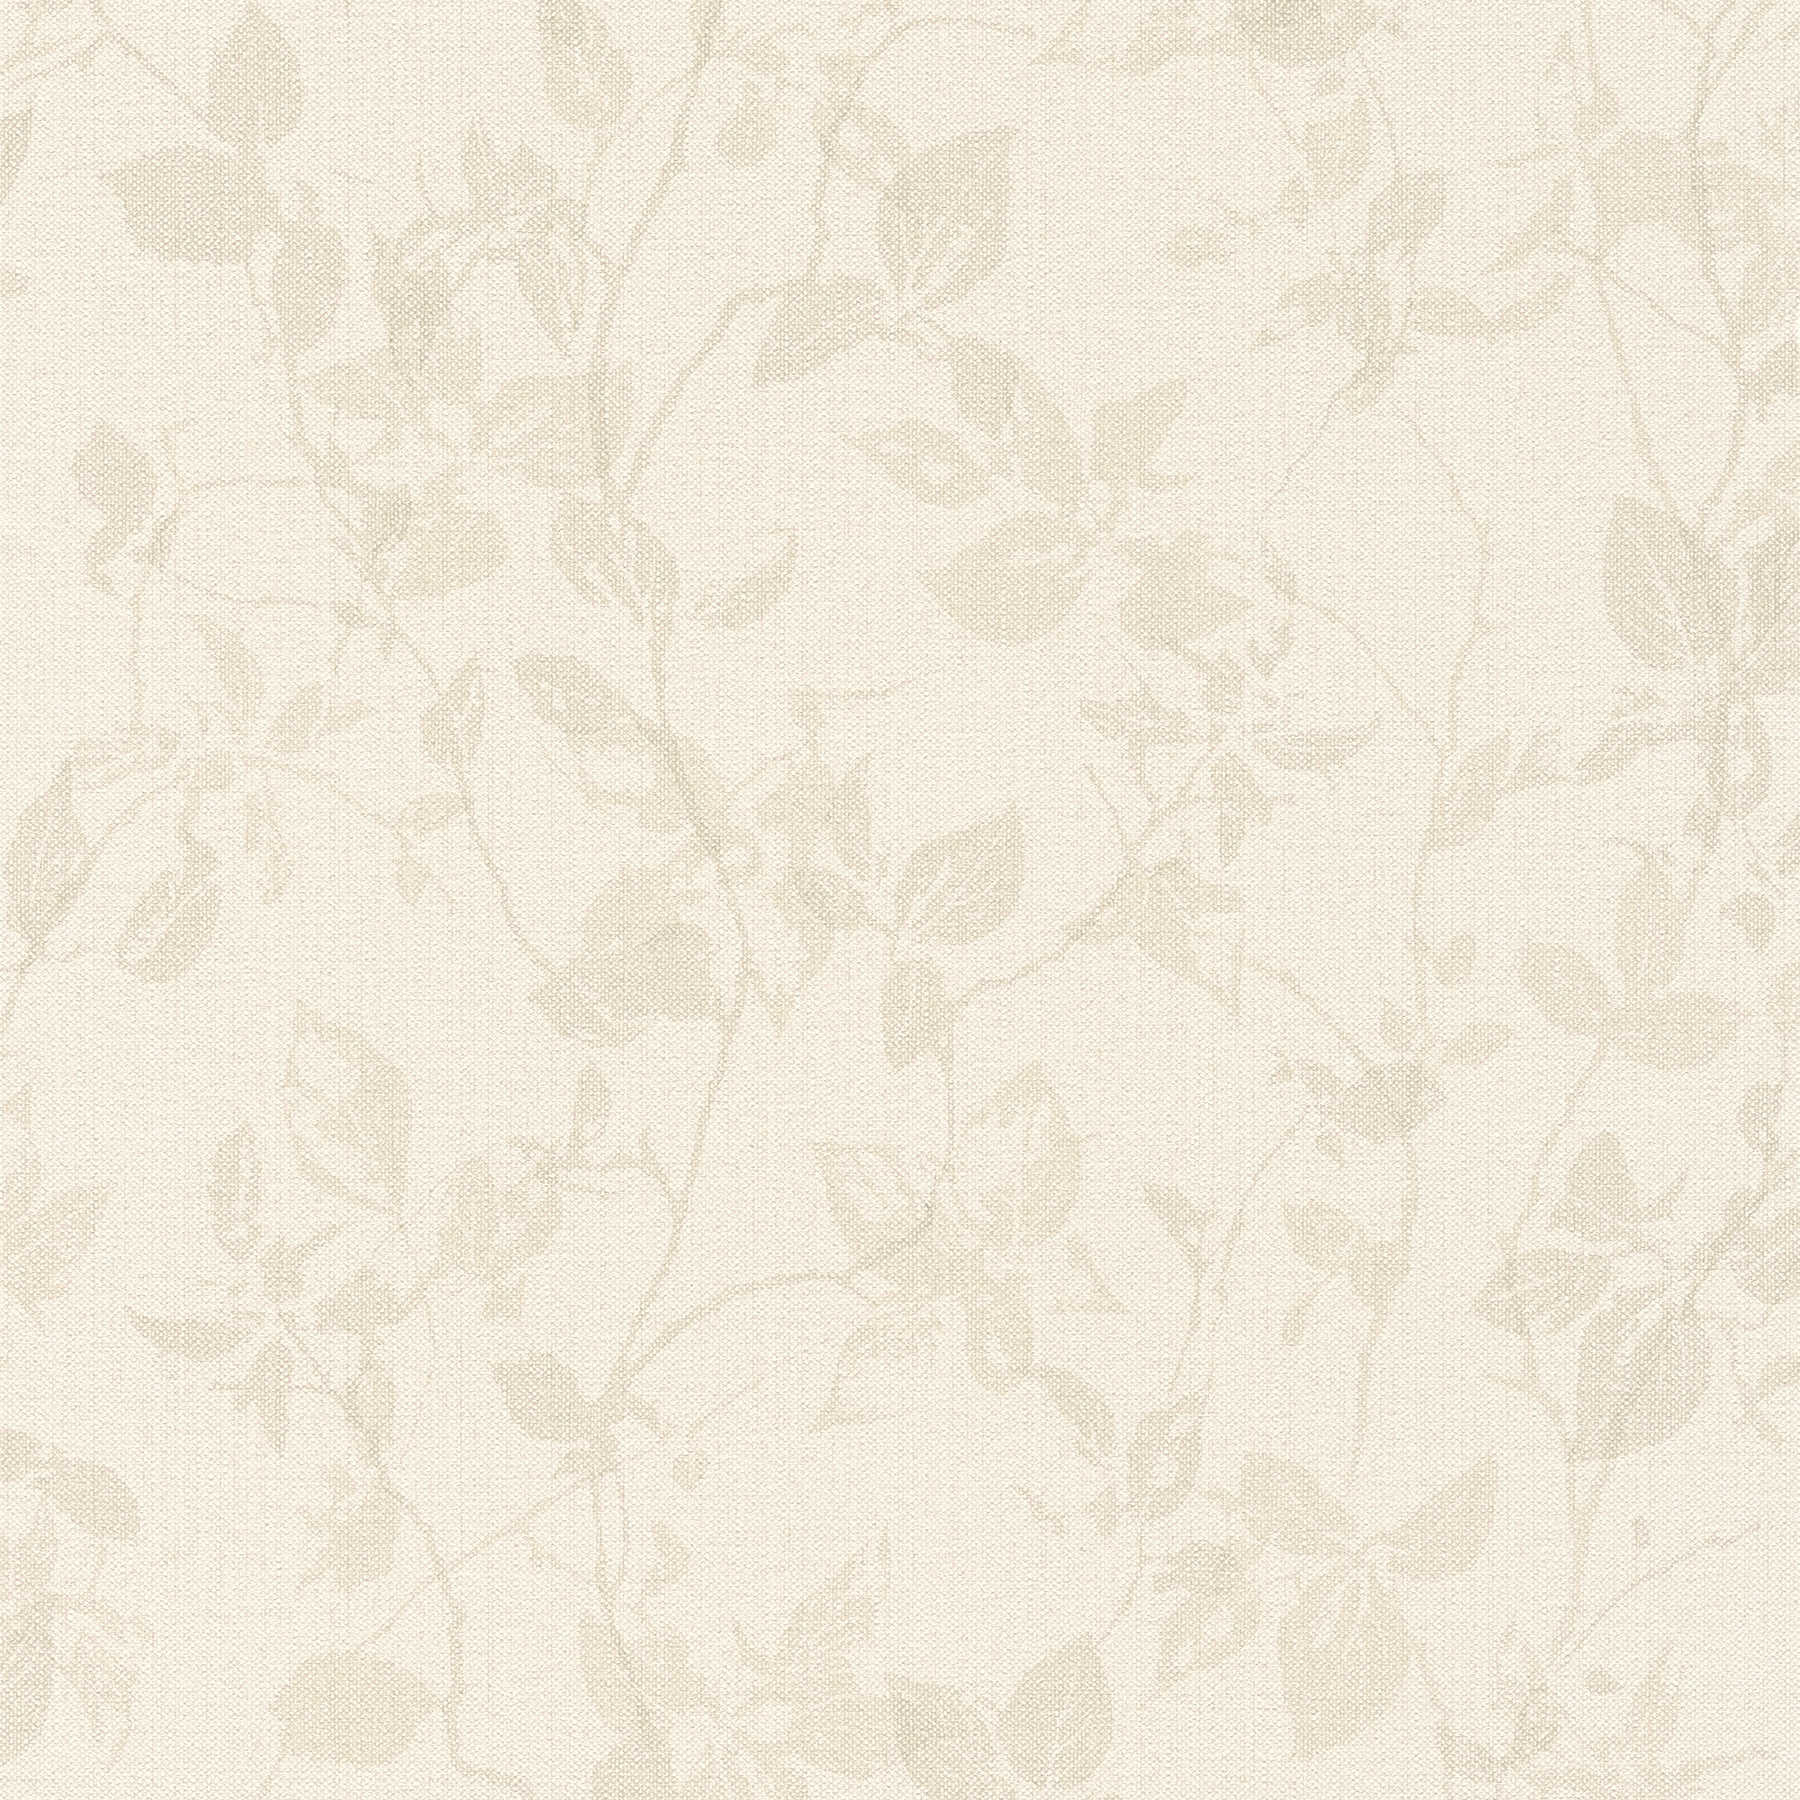 Linen optics wallpaper with leaves motif in country style - beige
